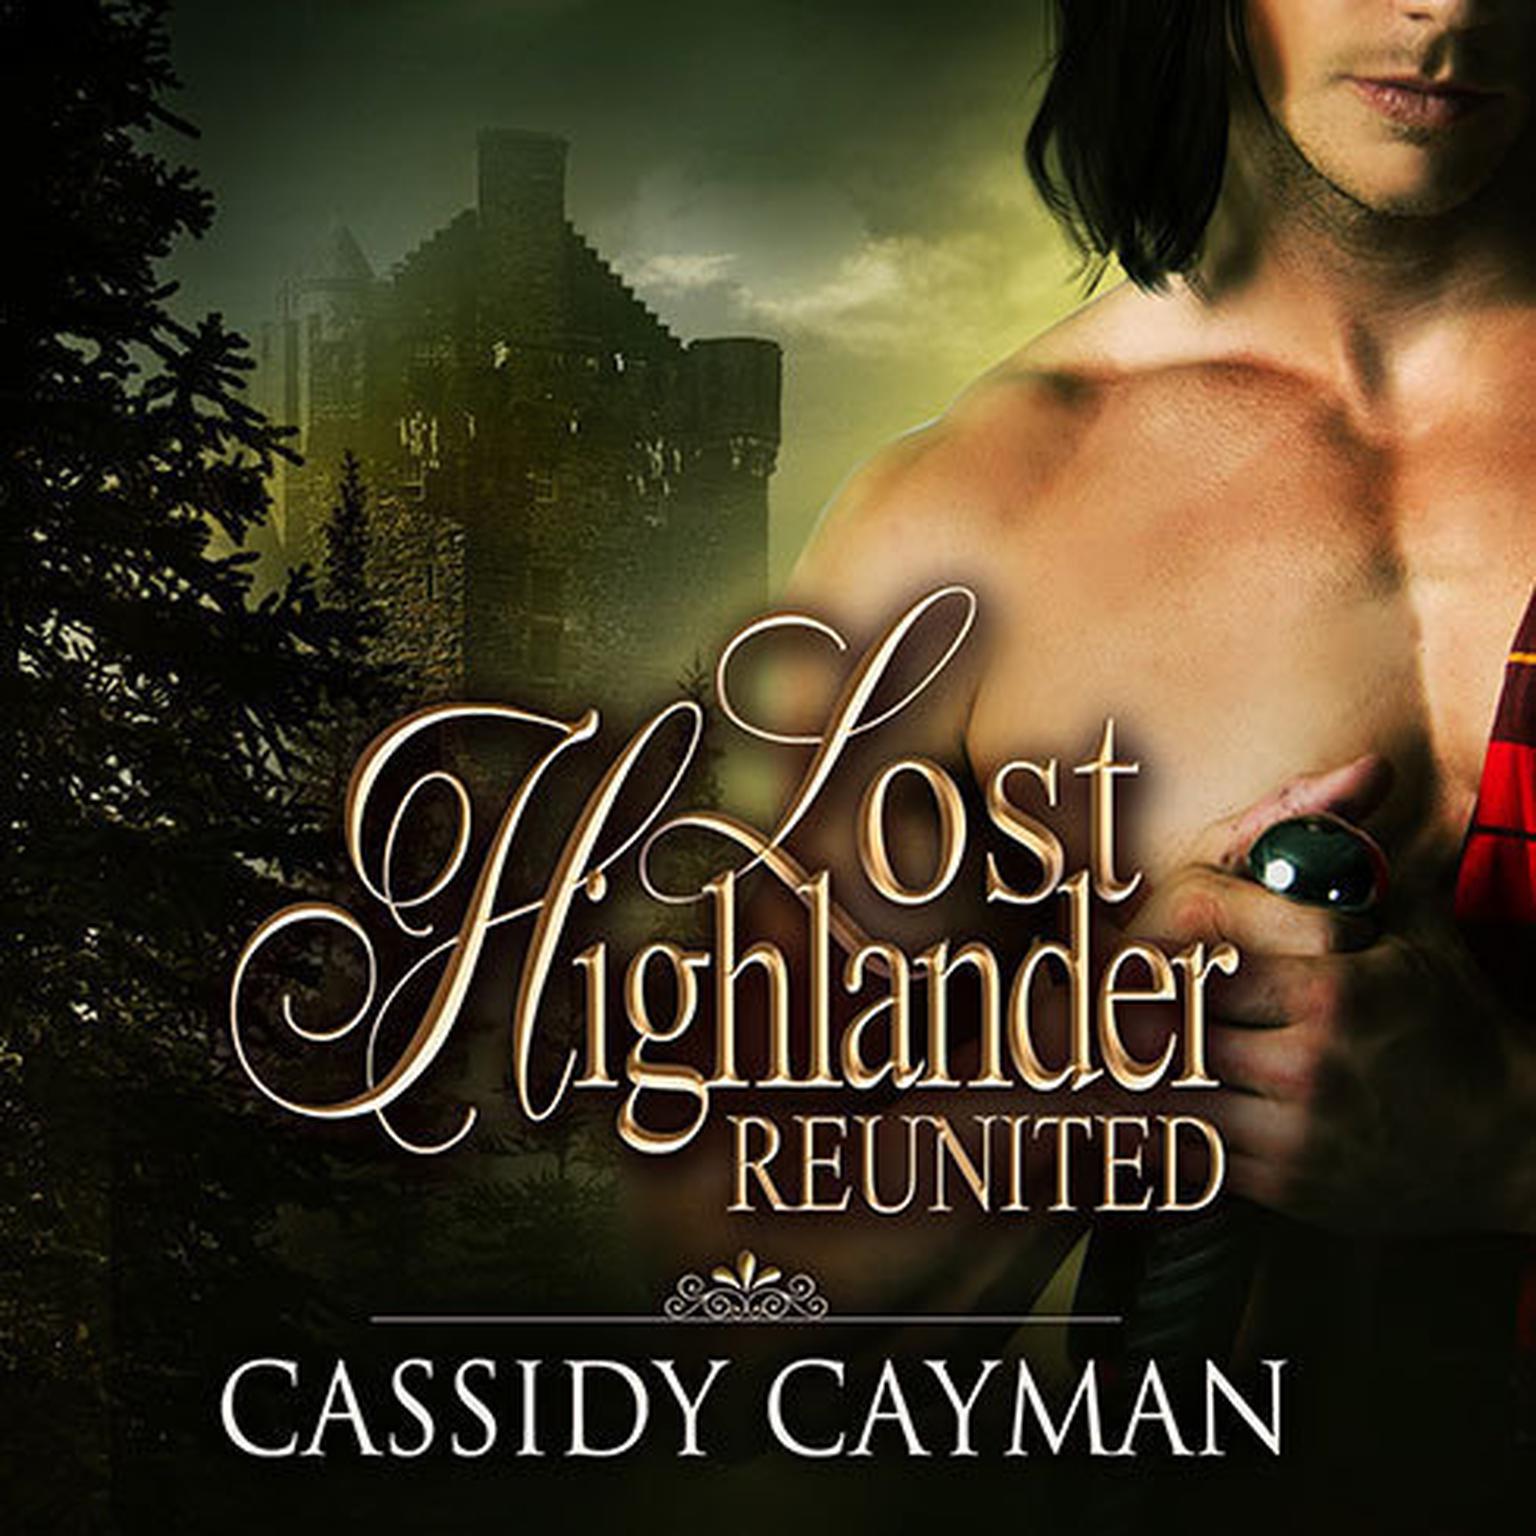 Reunited Audiobook, by Cassidy Cayman